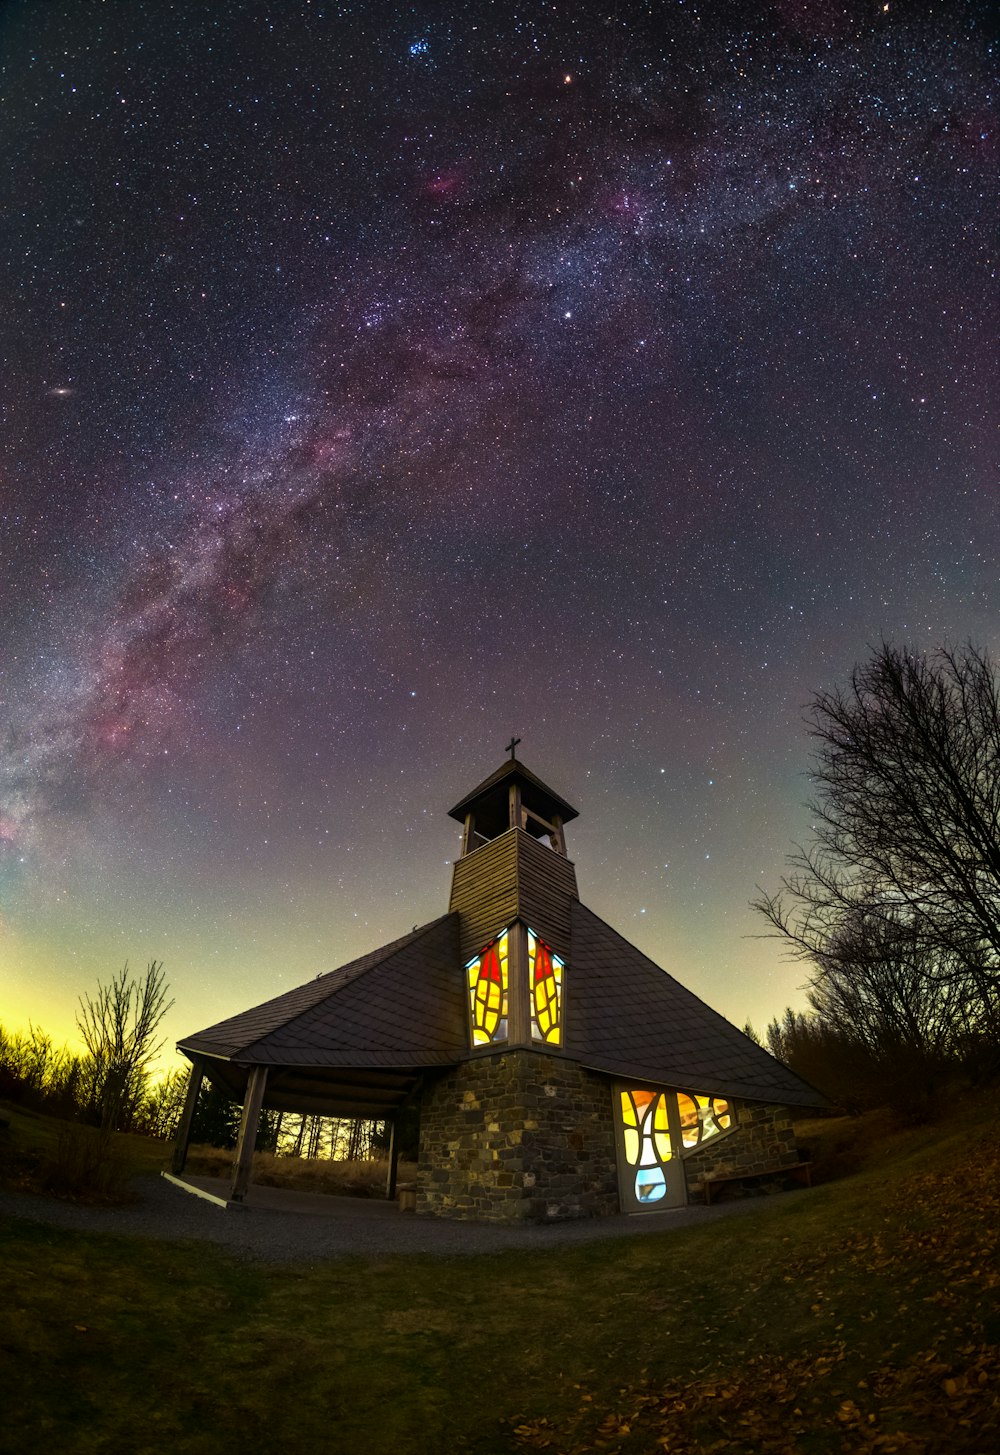 a church with a clock tower under a night sky filled with stars